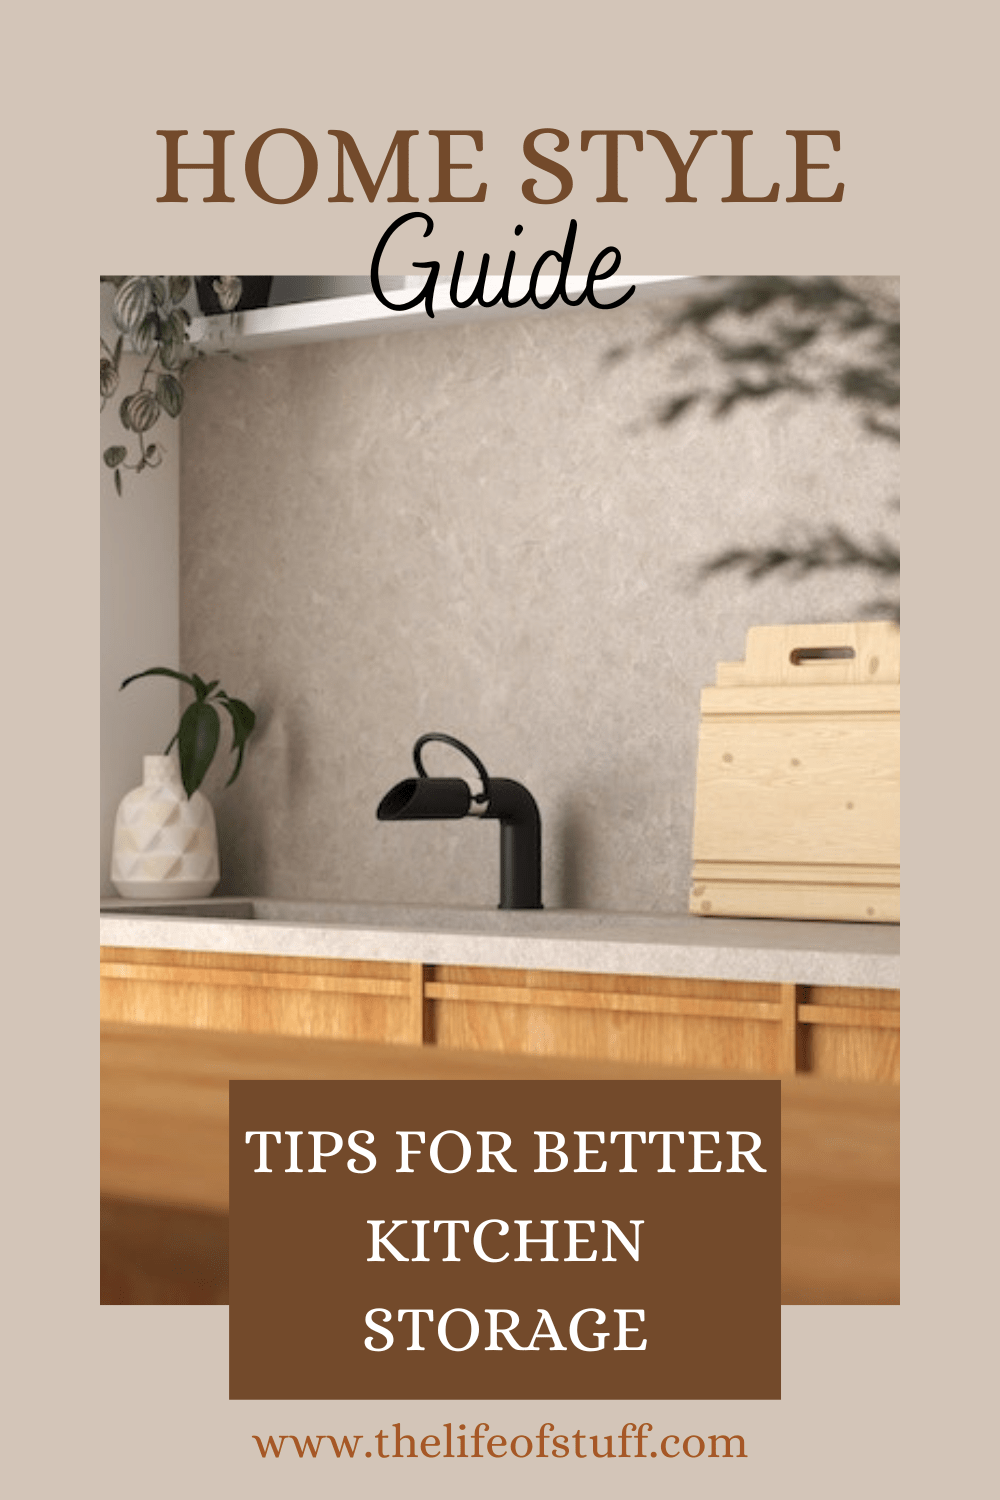 Home Style Guide - Tips for Better Kitchen Storage - The Life of Stuff